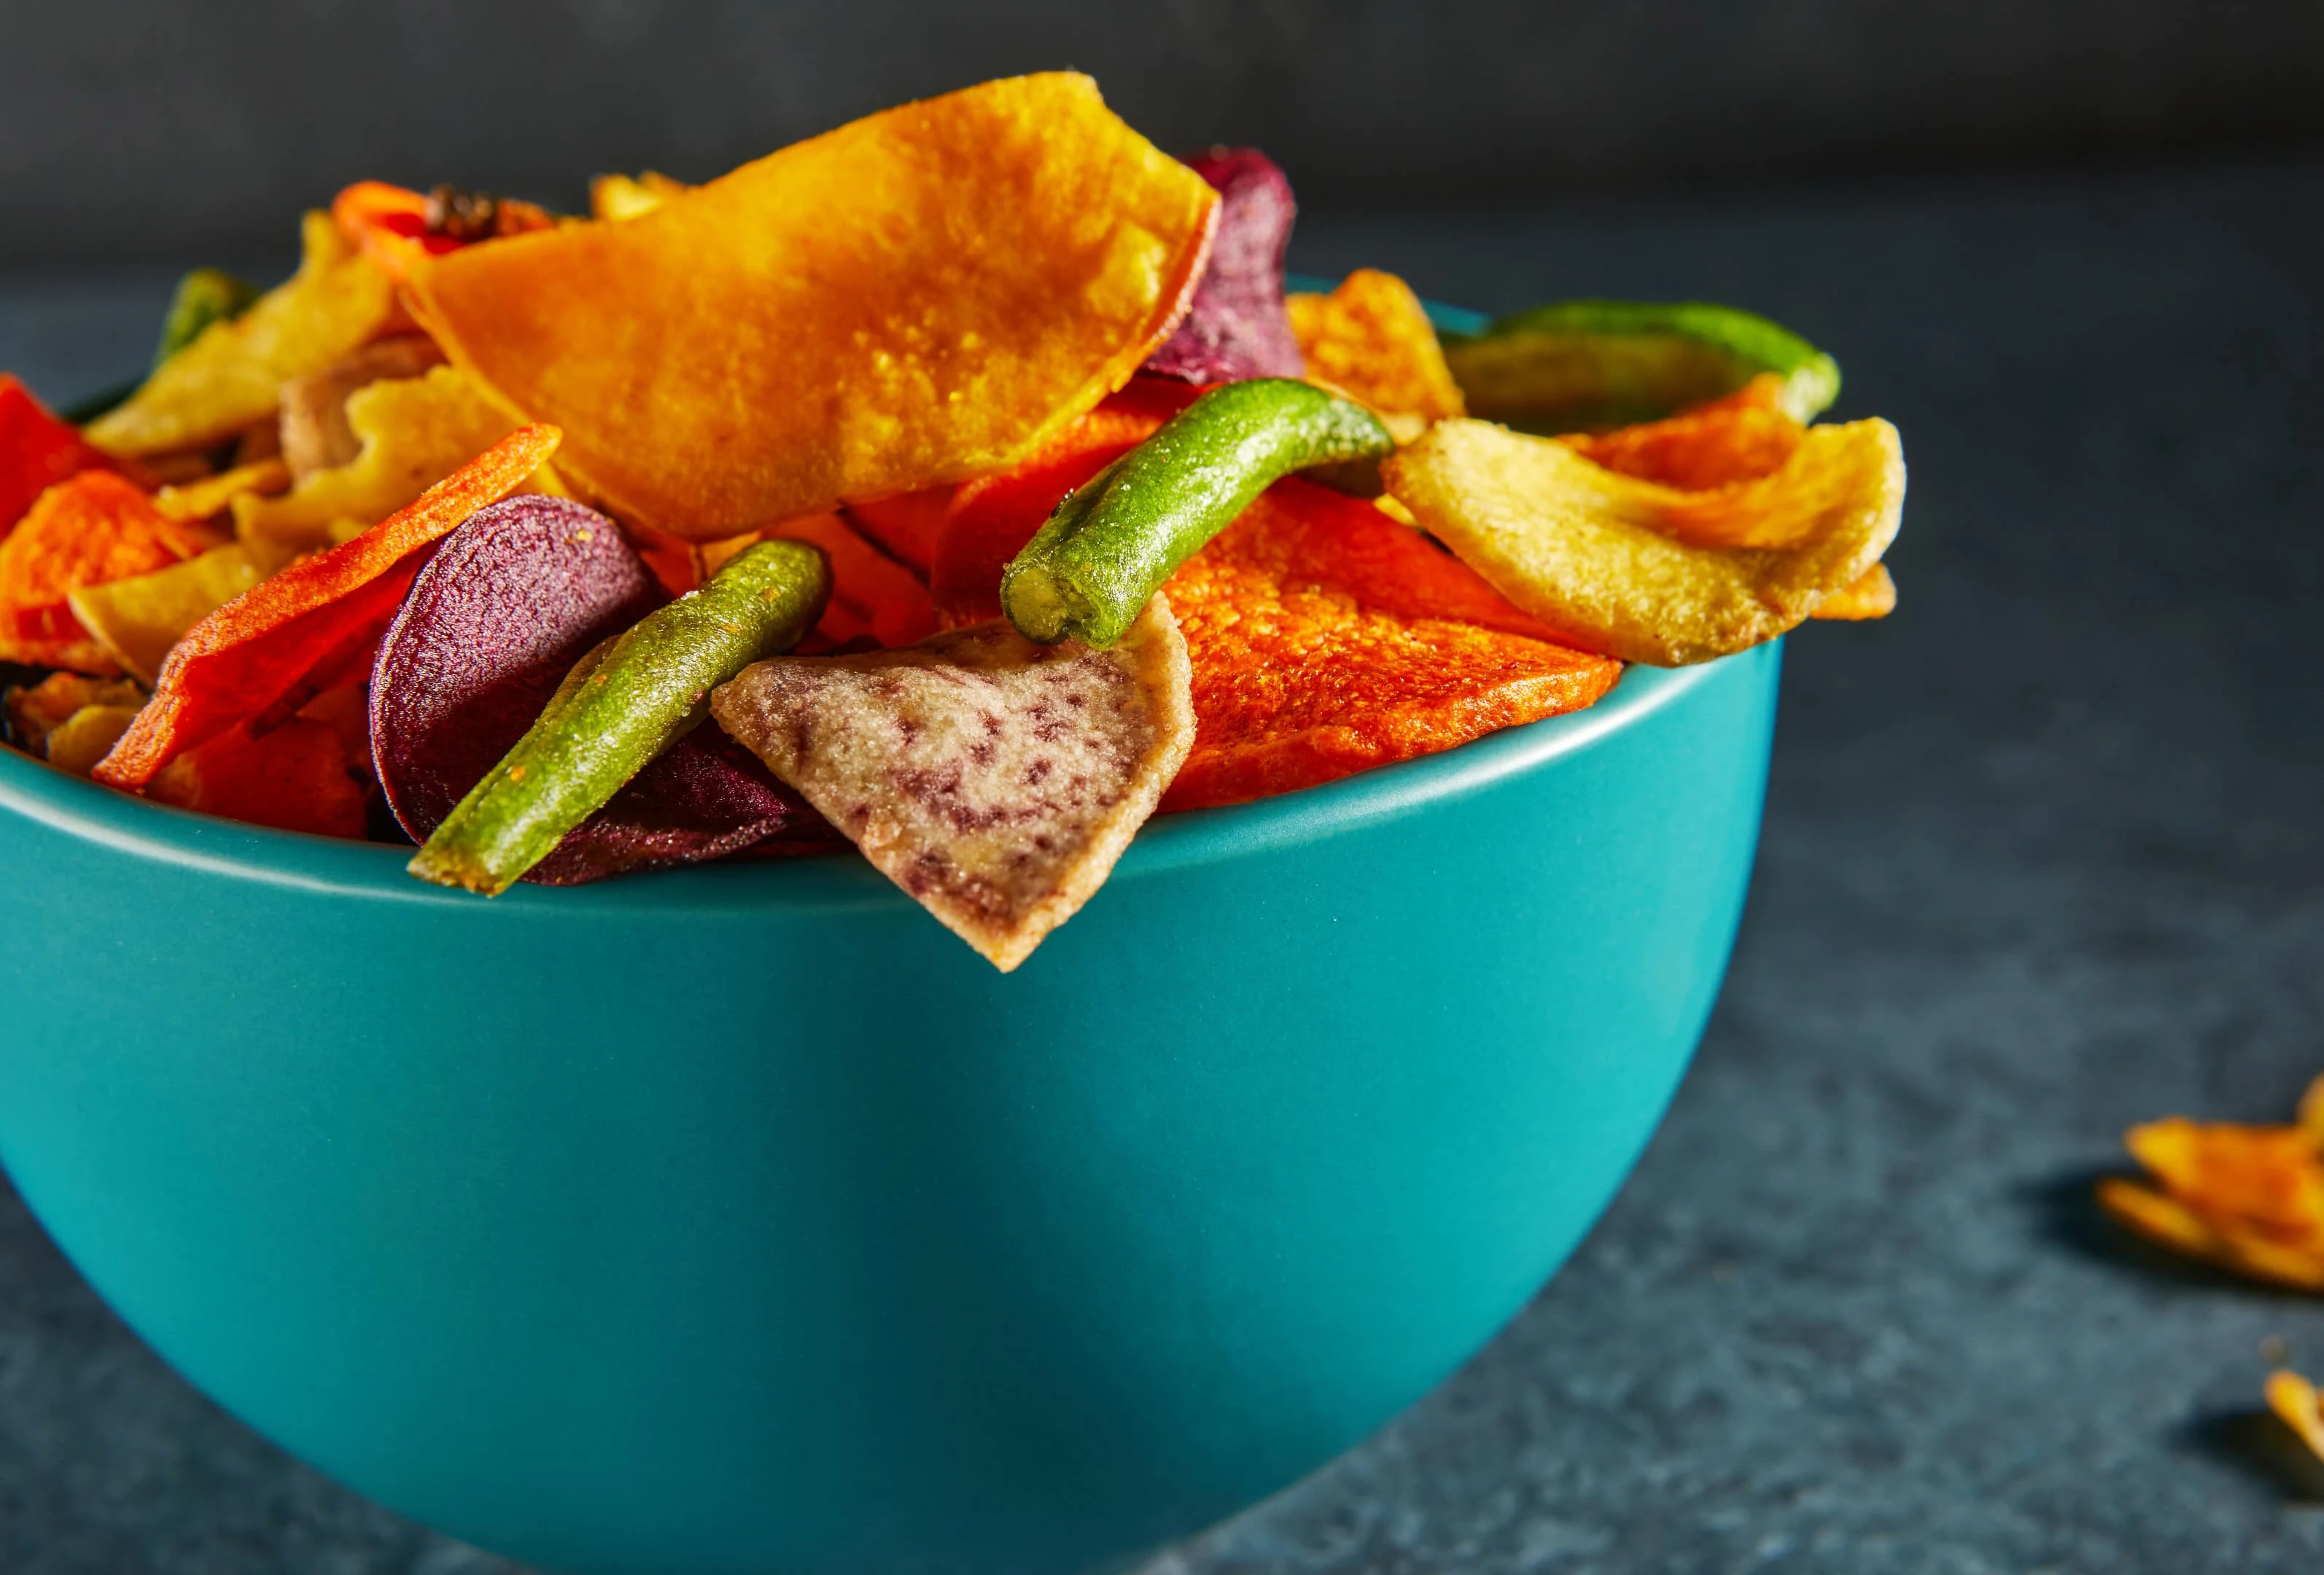 Dehydrated vegetable chips in blue bowl